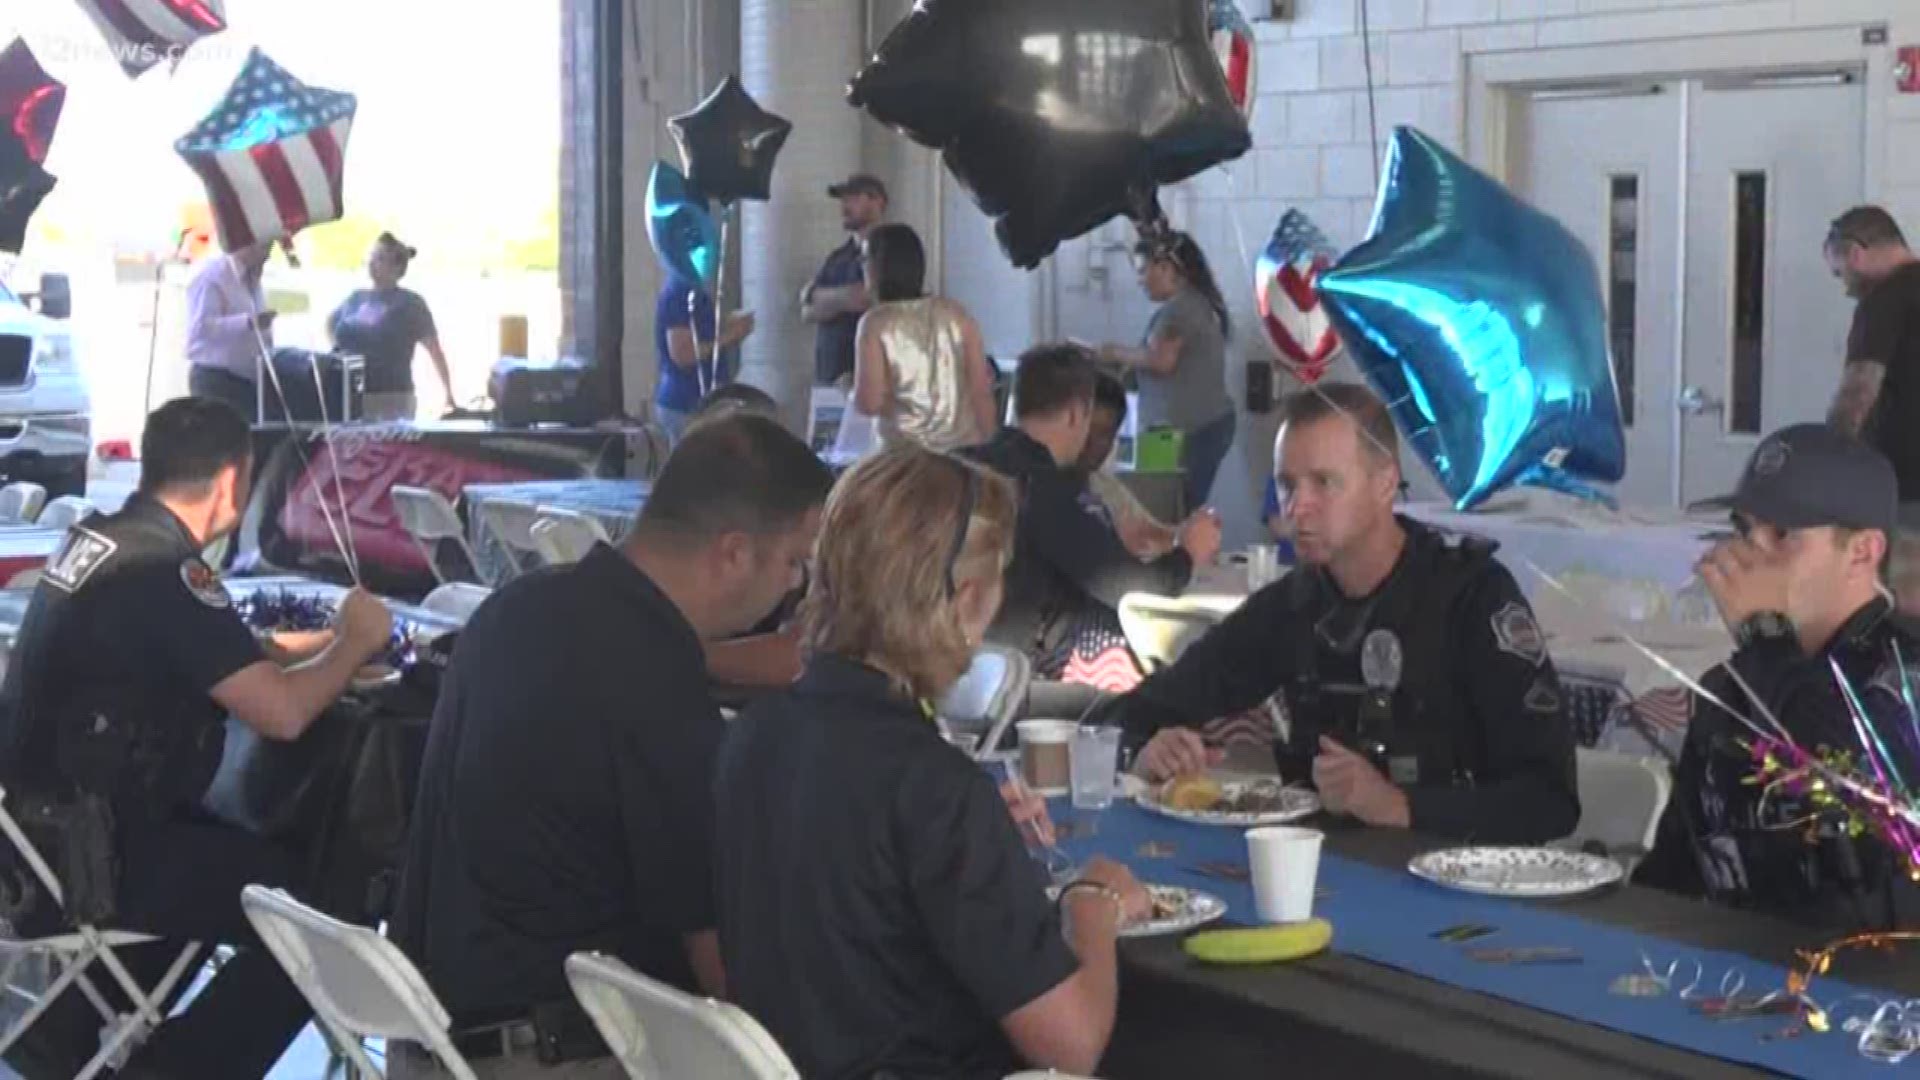 Joshua Kinnard Foundation hosts breakfast for law enforcement, veterans, and the public in Chandler to raise awareness about mental health issues and interact with the community.